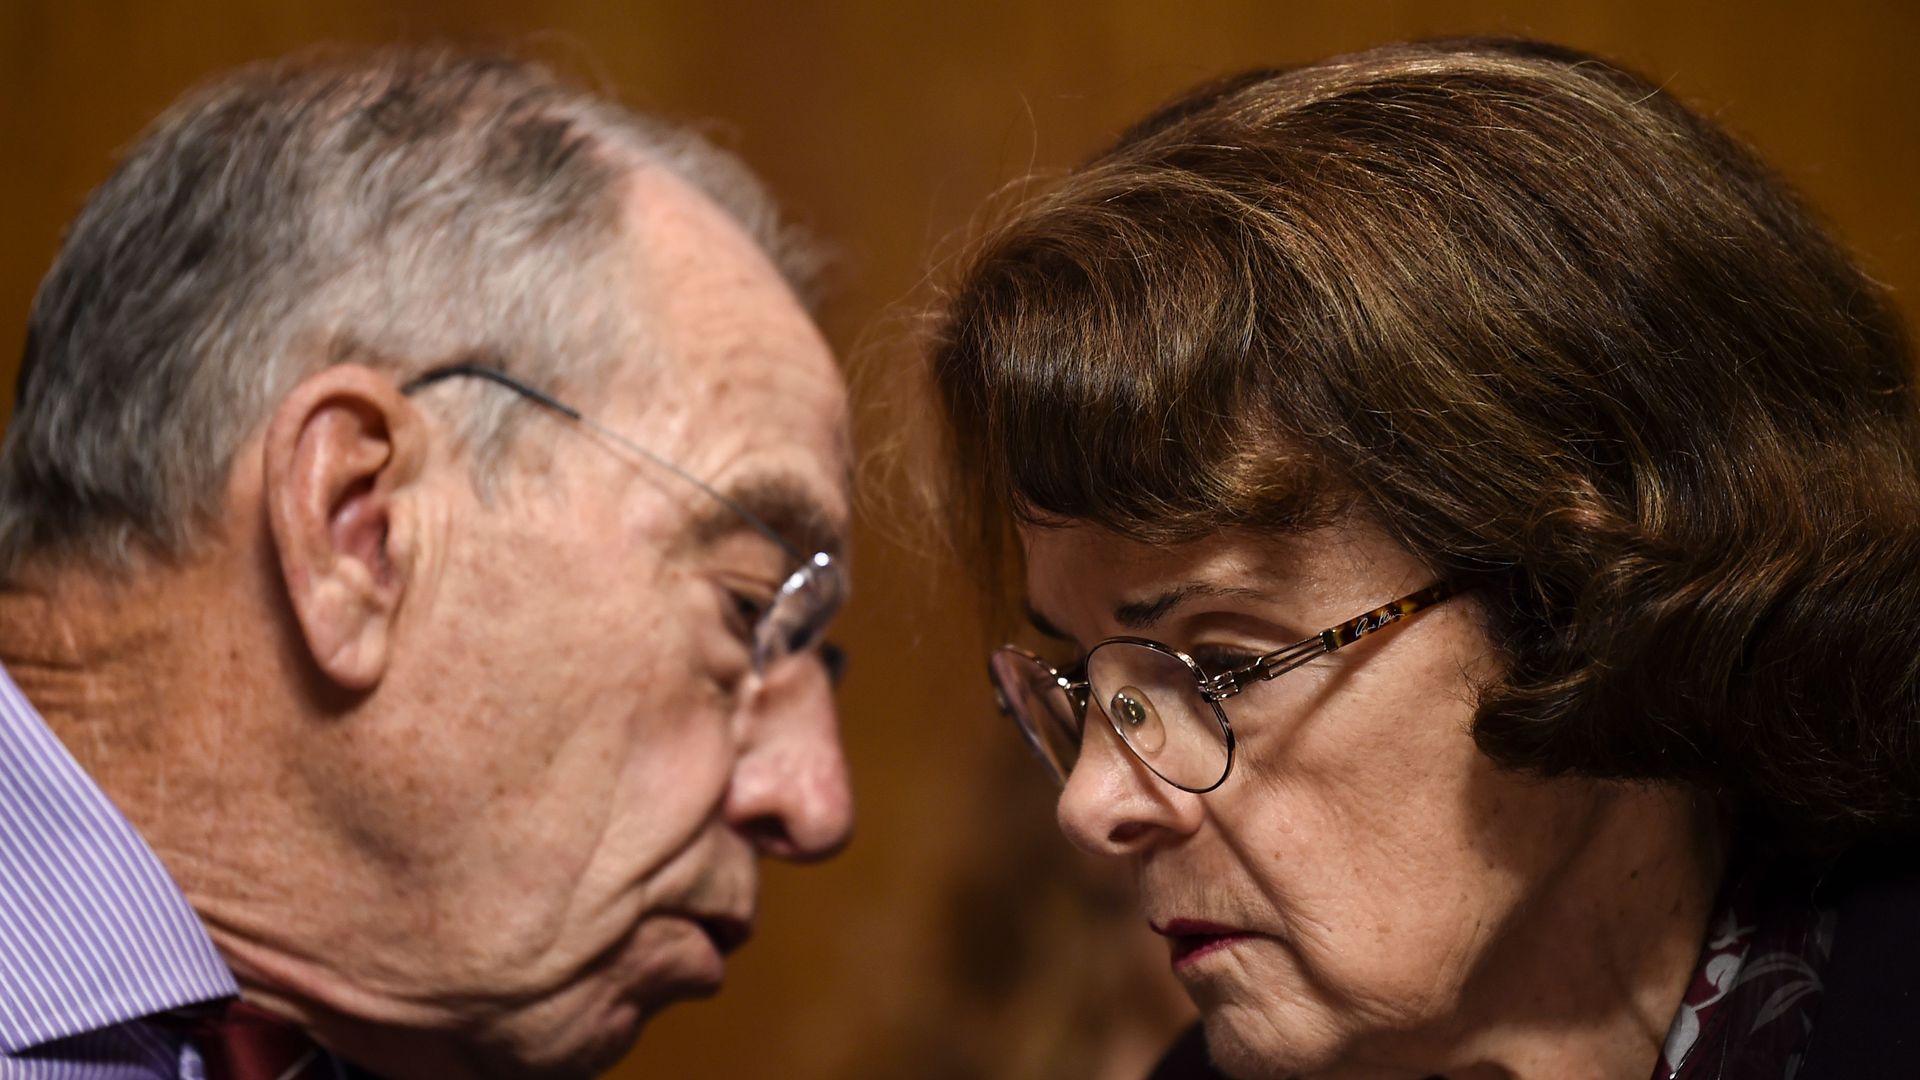 Feinstein and Grassley huddle and talk with bent heads.